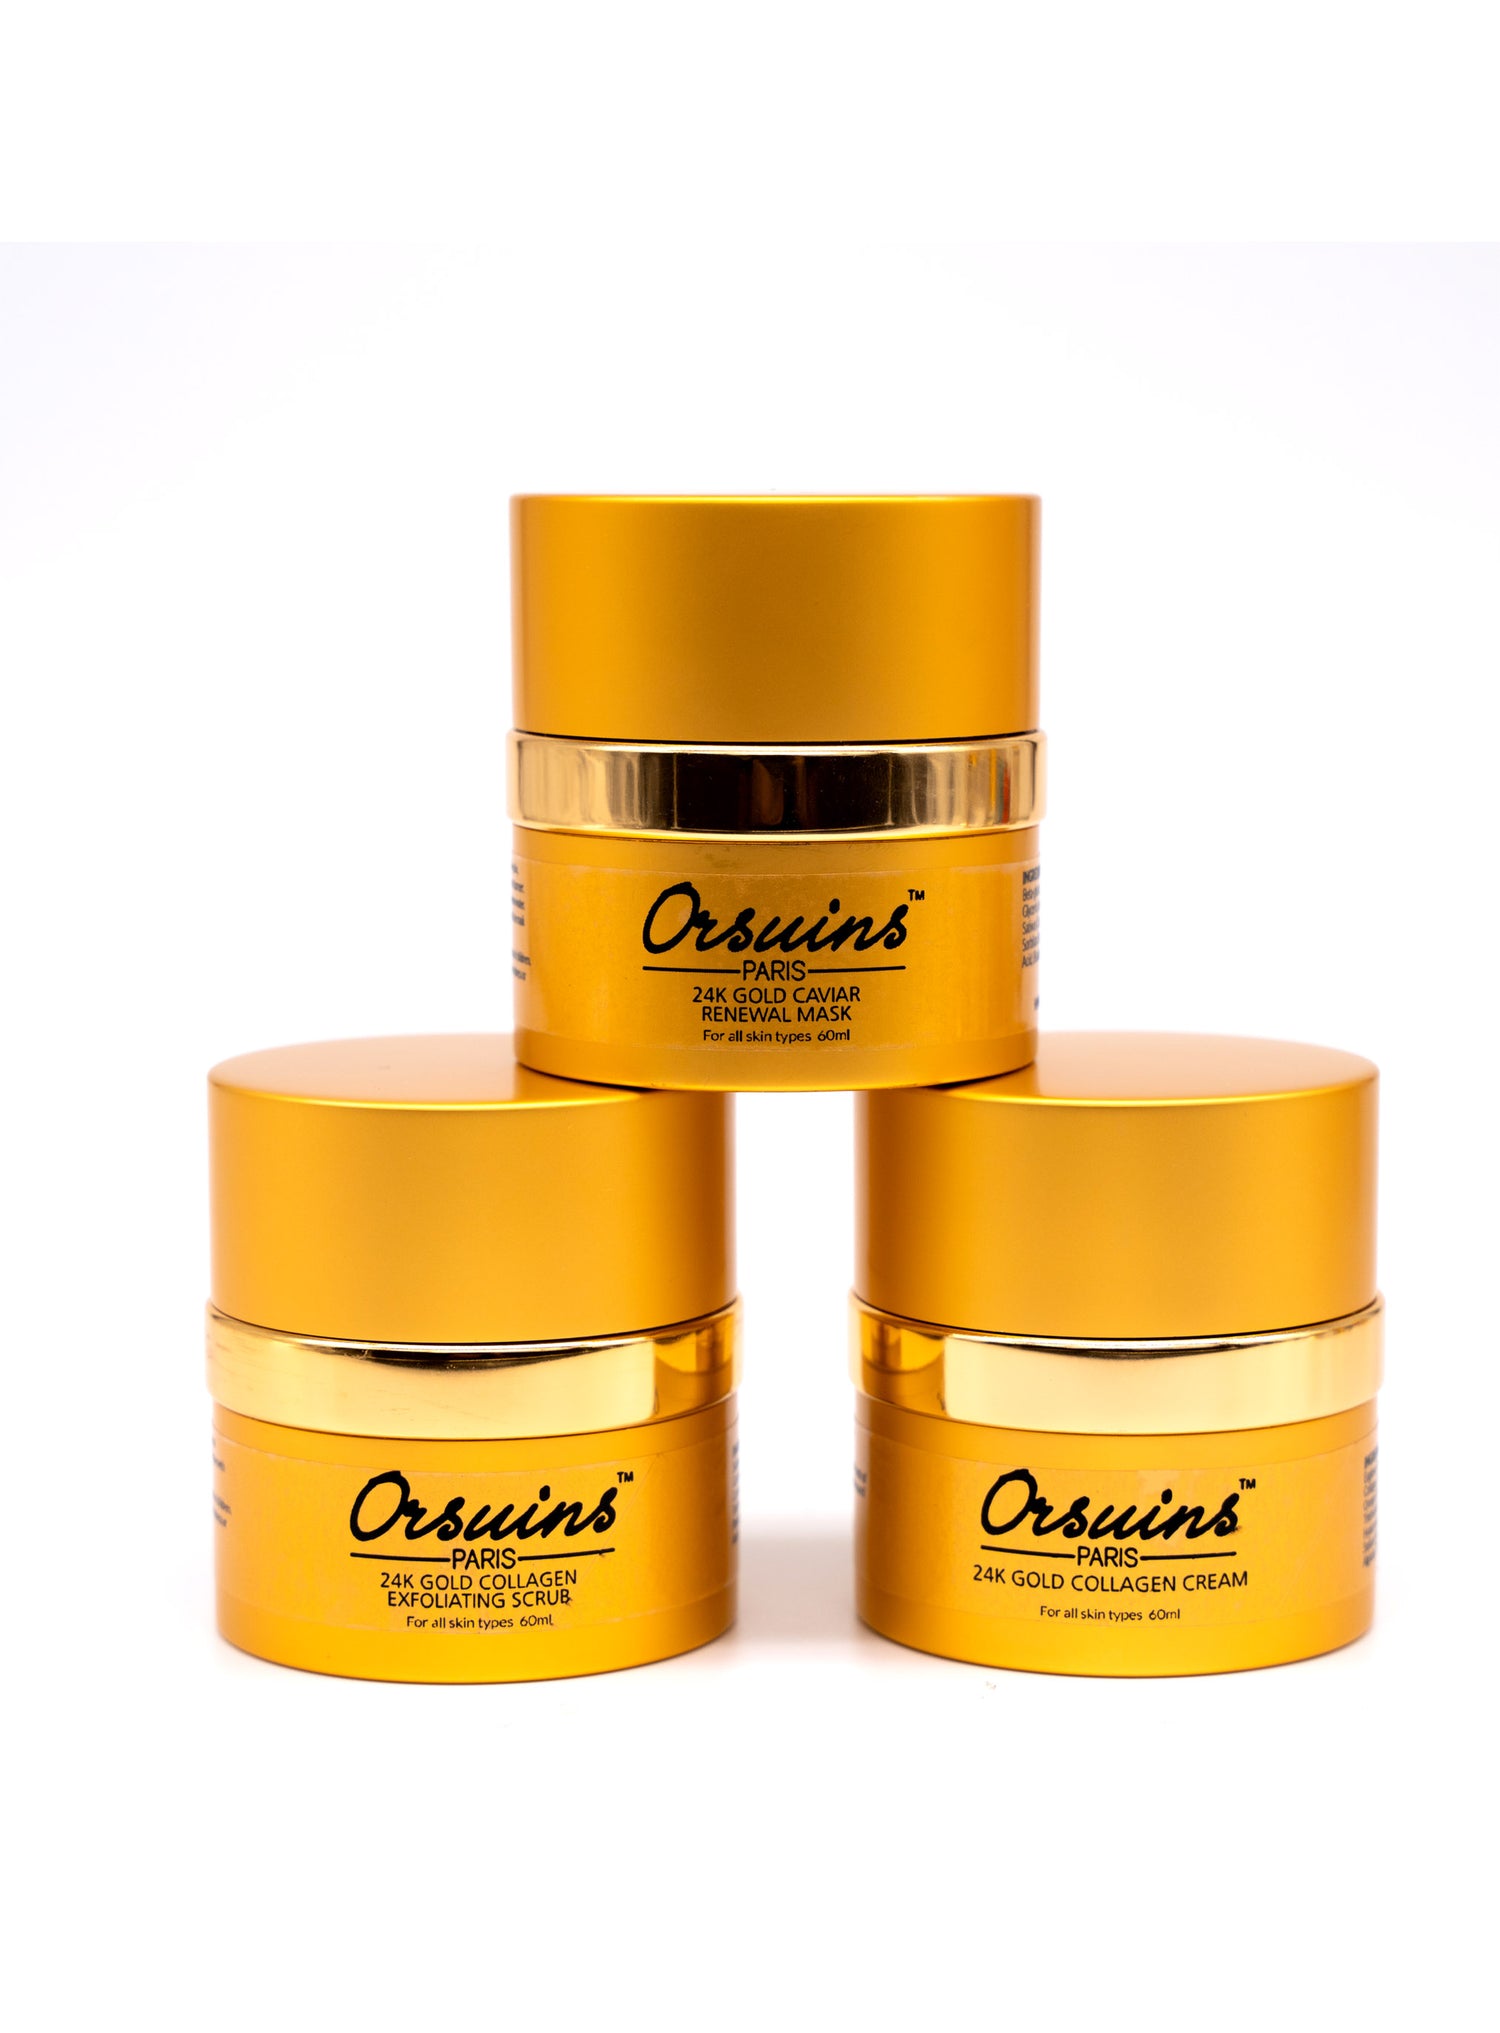 Orsuins skin care products